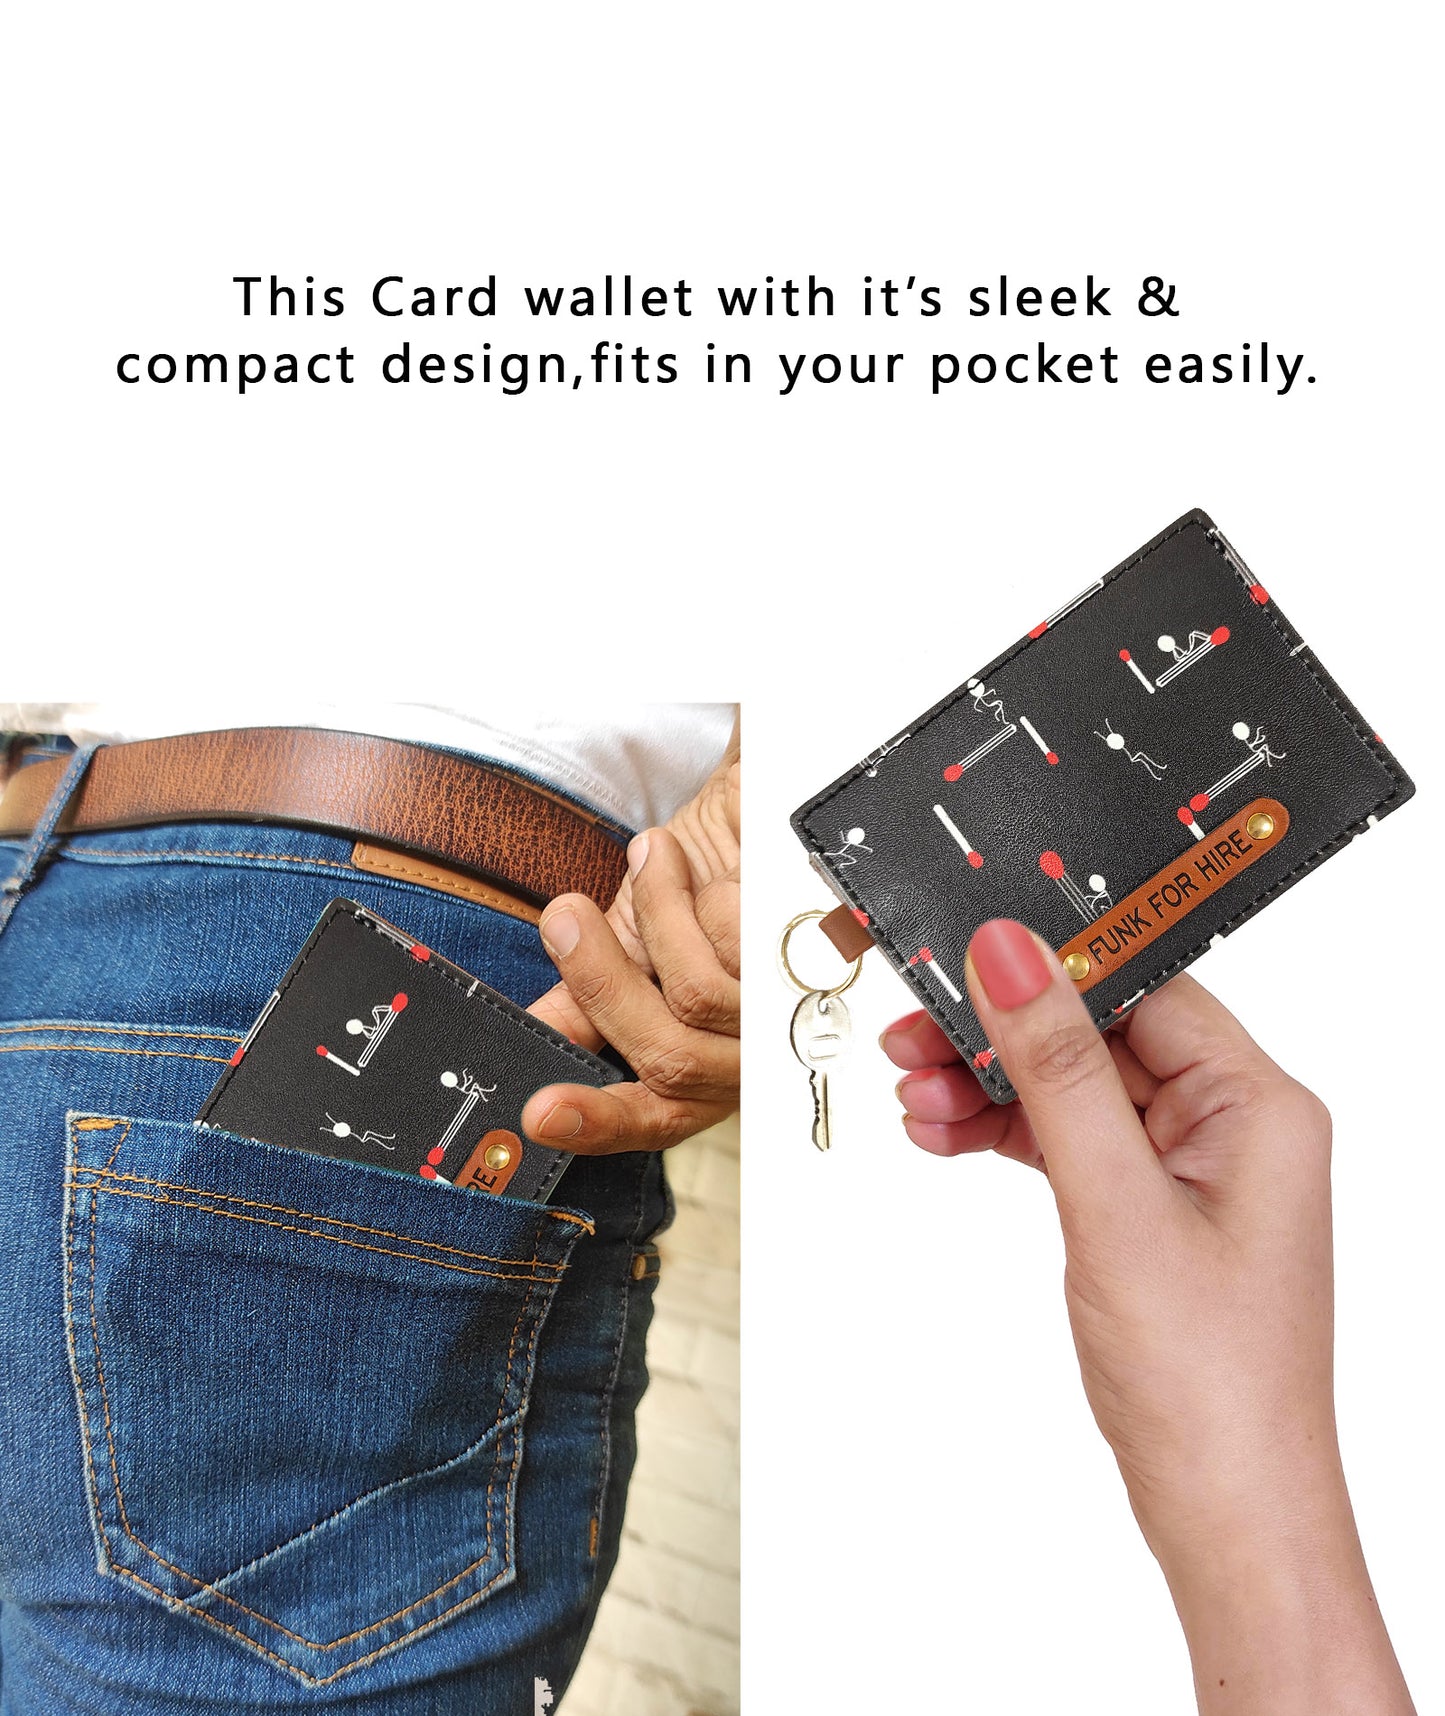 Combo Offers : Match Collage Laptop Grey Sleeve & Matchstick Card Black Wallet